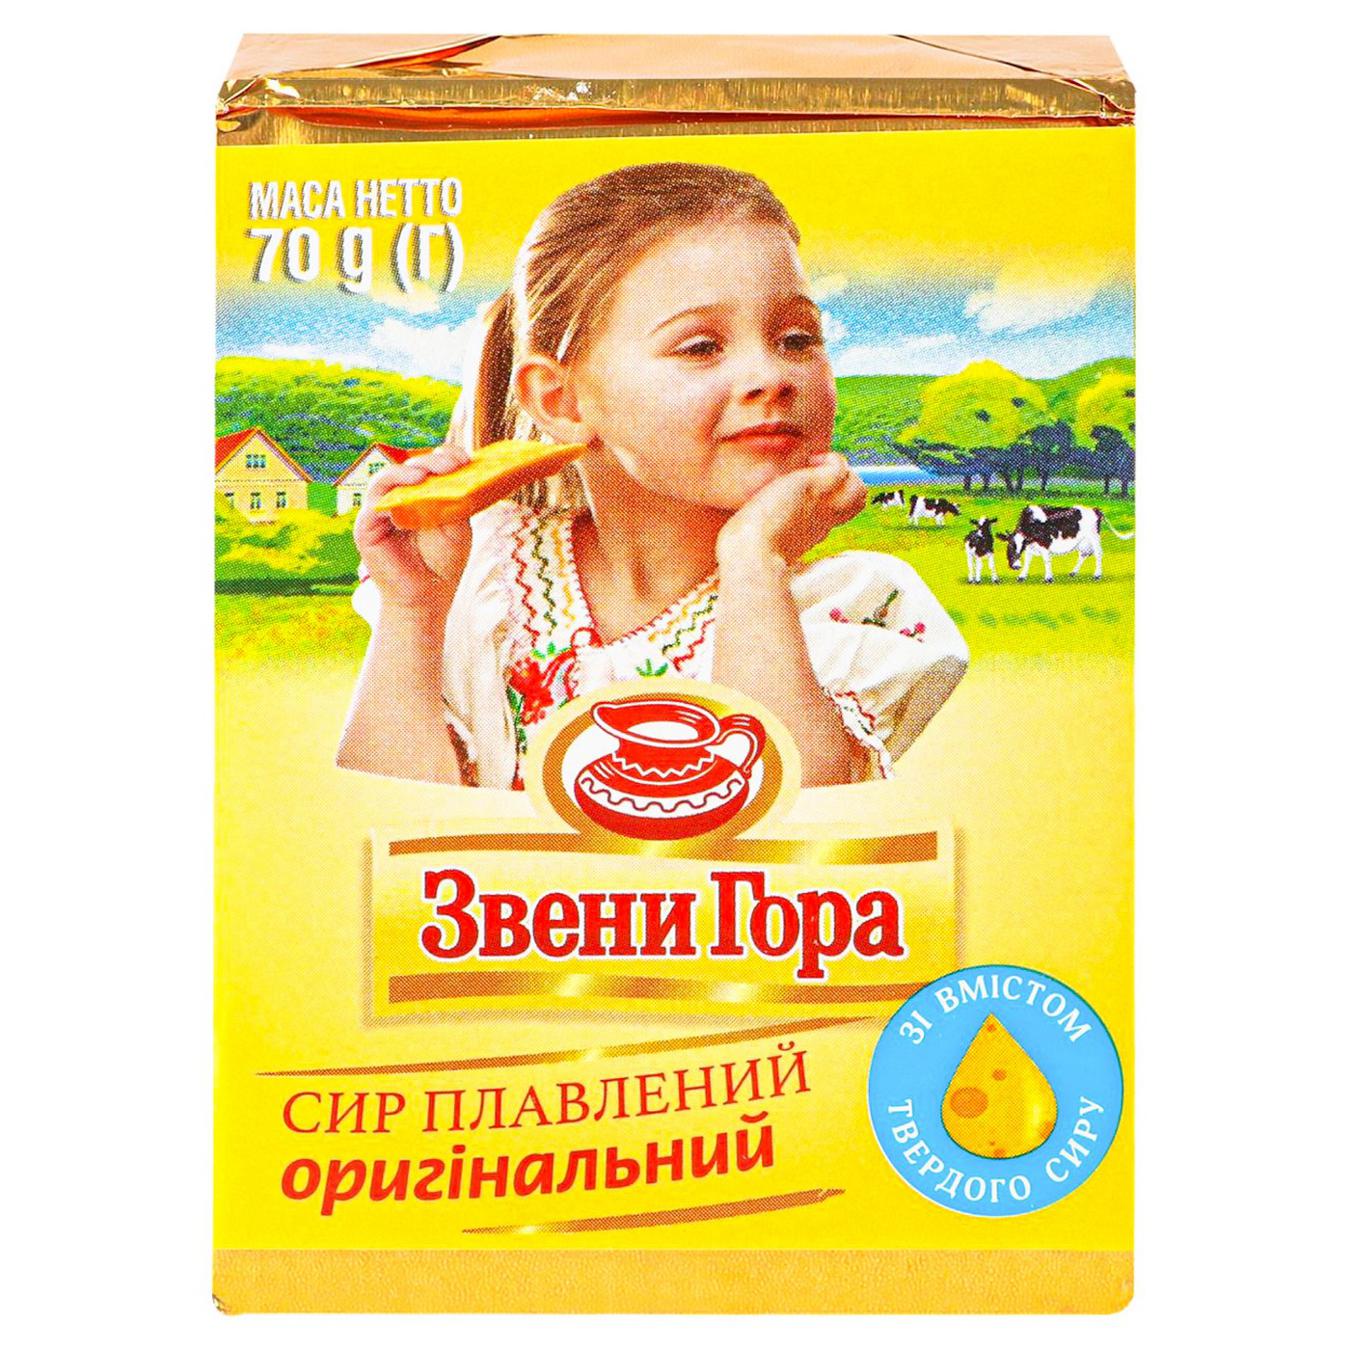 Zveny Hora original melted cheese portioned 50% 70g